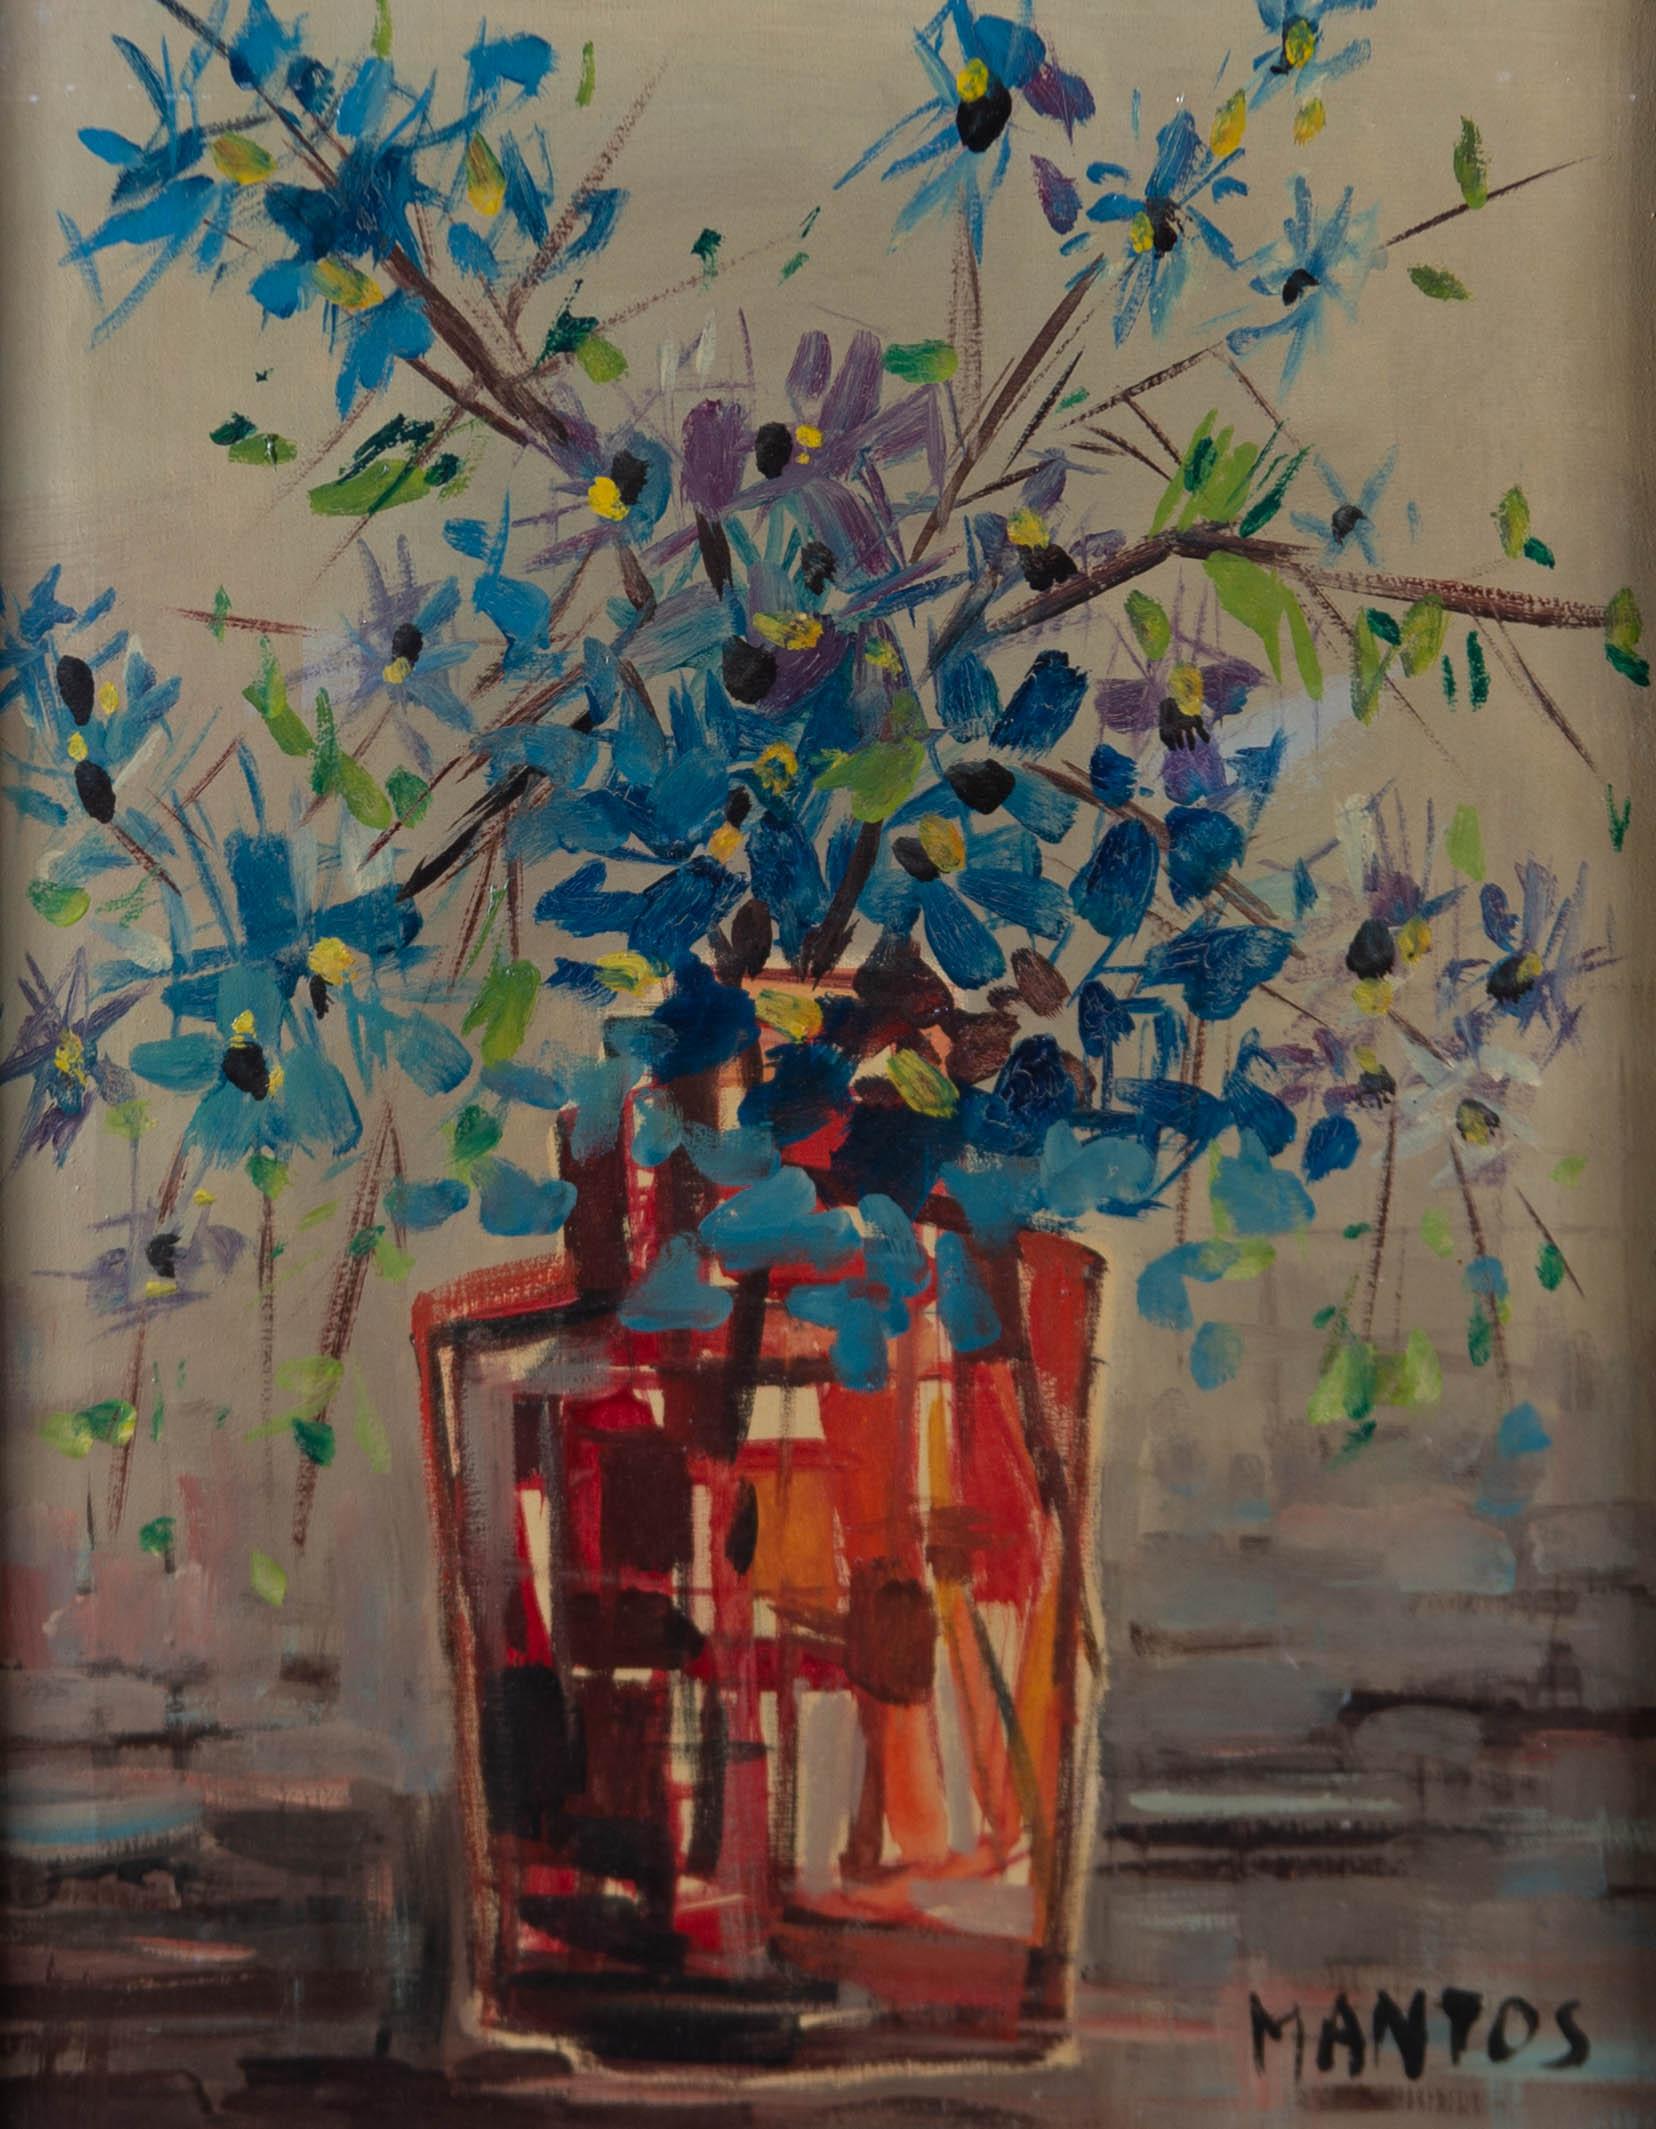 Mantos - Signed & Framed Mid 20th Century Oil, Red Vase Blue Flowers - Painting by Unknown